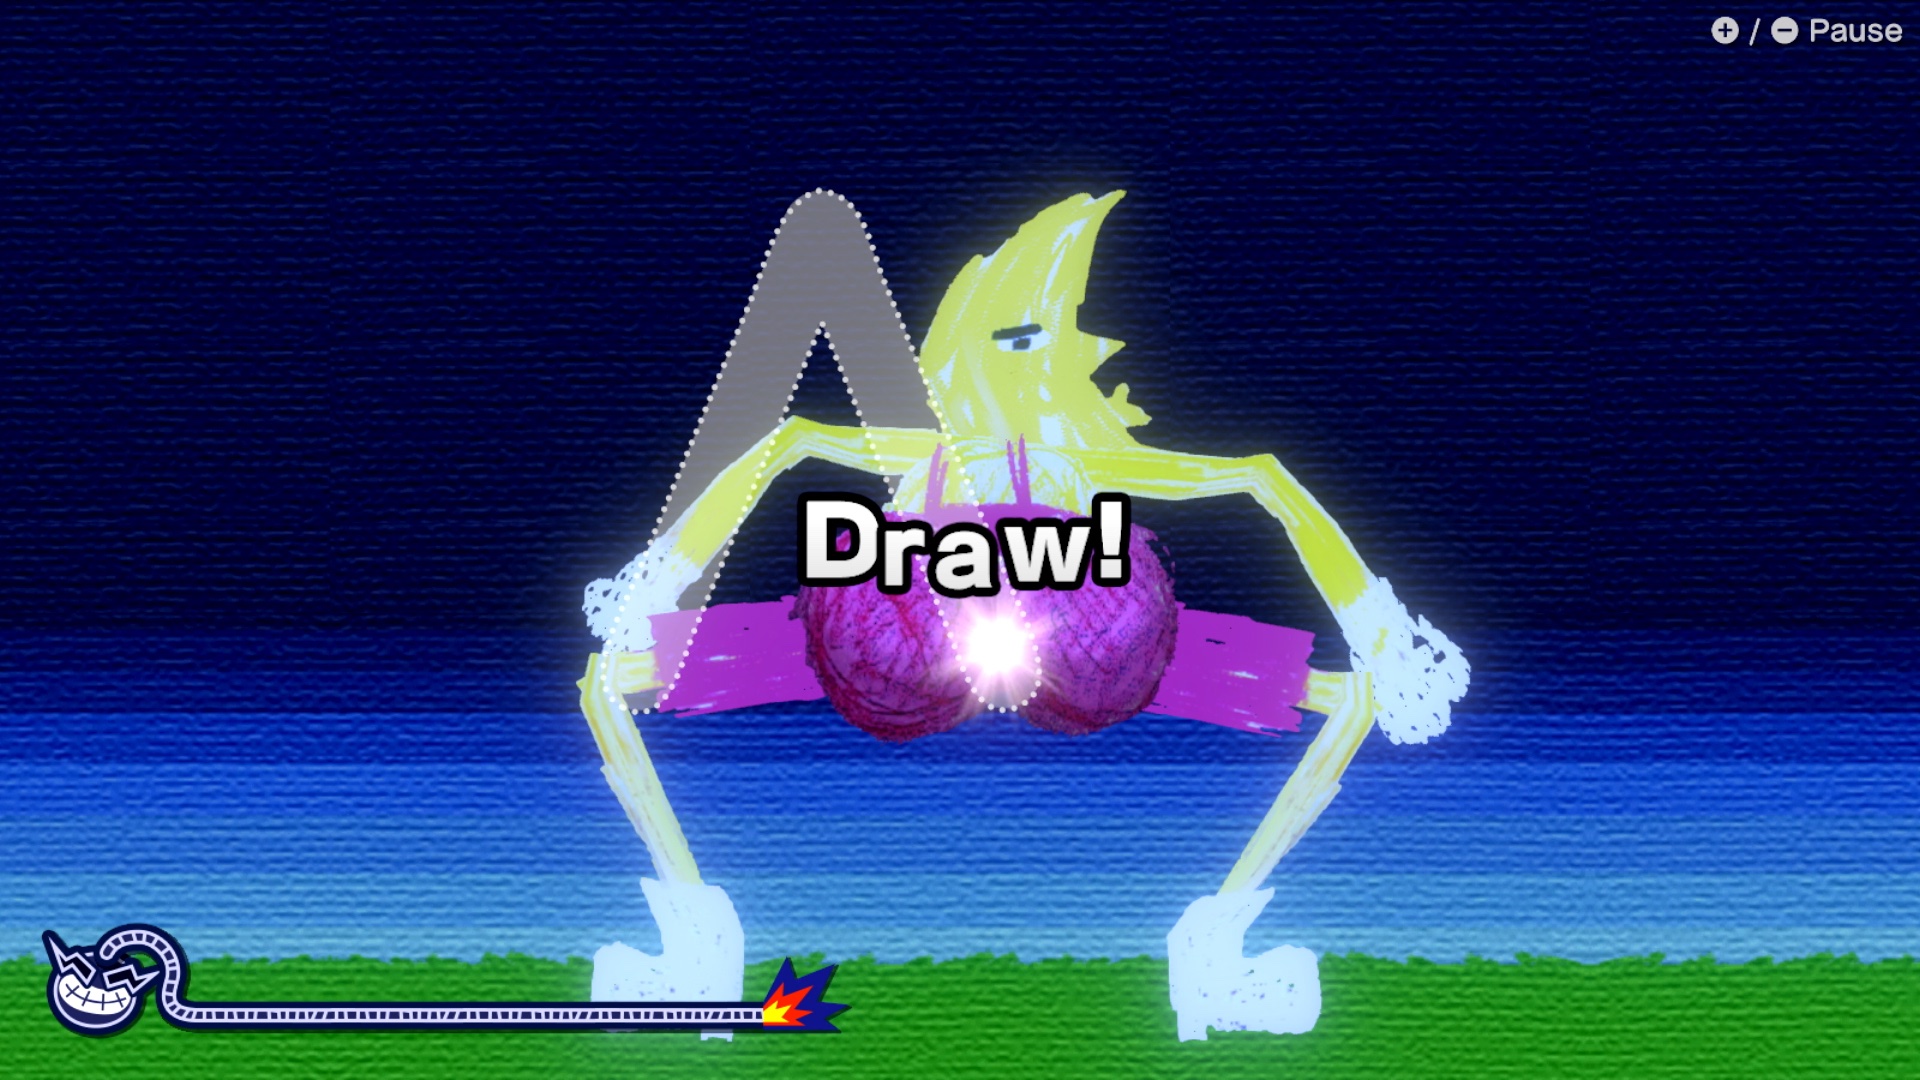 A screenshot of the Buttograph microgame from WarioWare: Move It! featuring a character with a quarter-moon for a face bent over and drawing a three-line shape with its butt